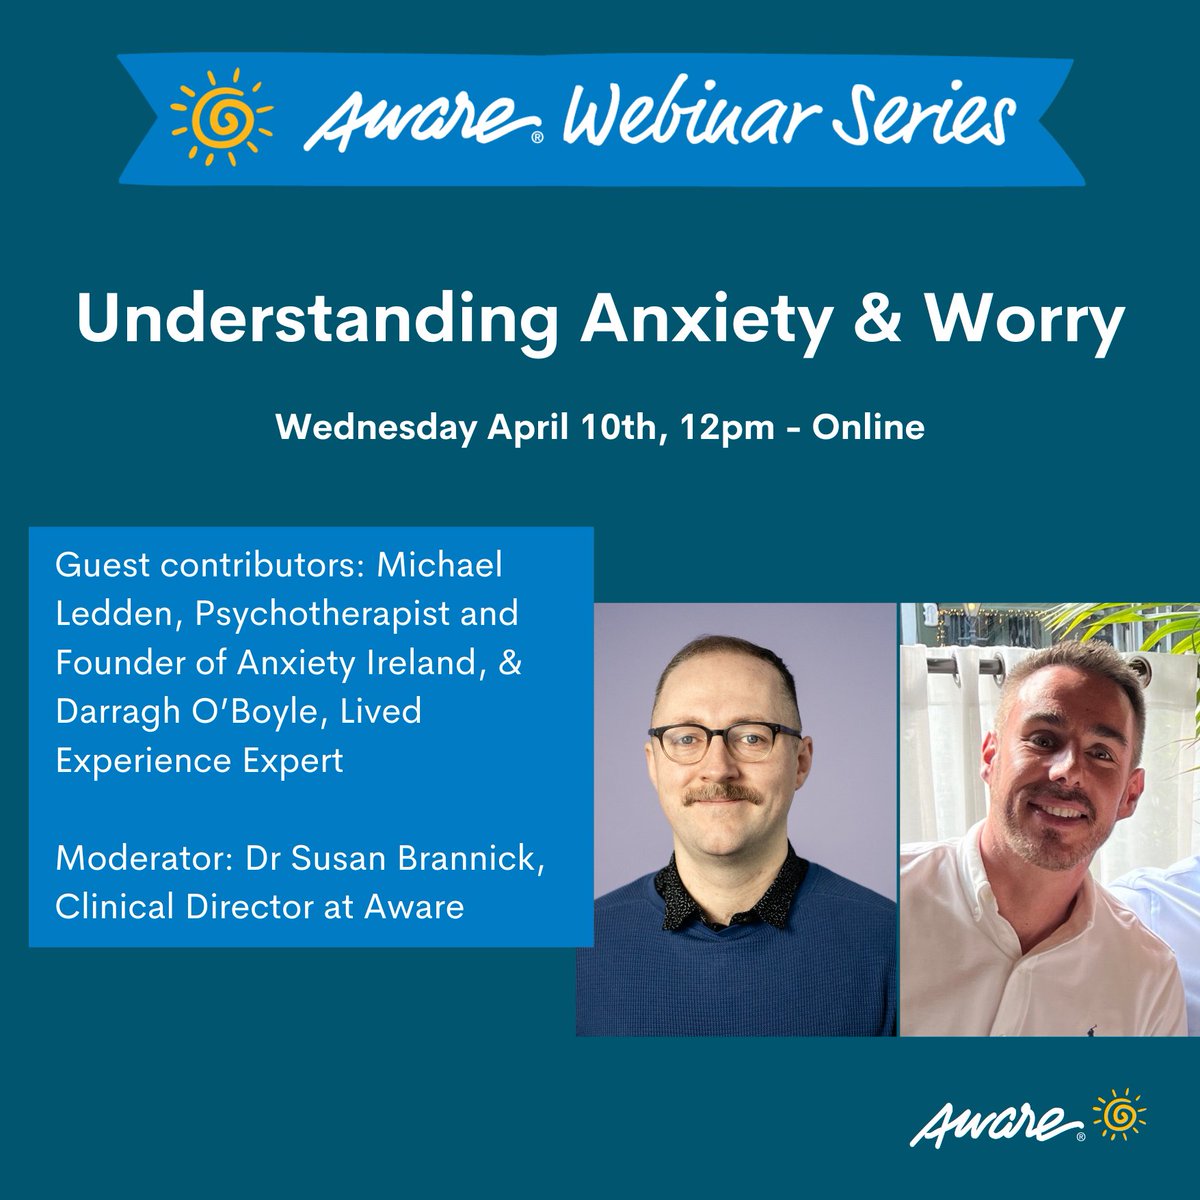 Join us on Wednesday at 12pm for our free webinar exploring the impact of anxiety and worry, and the mental health challenges people experiencing anxiety may face. Sign up for free 👉 aware.ie/webinars/upcom…